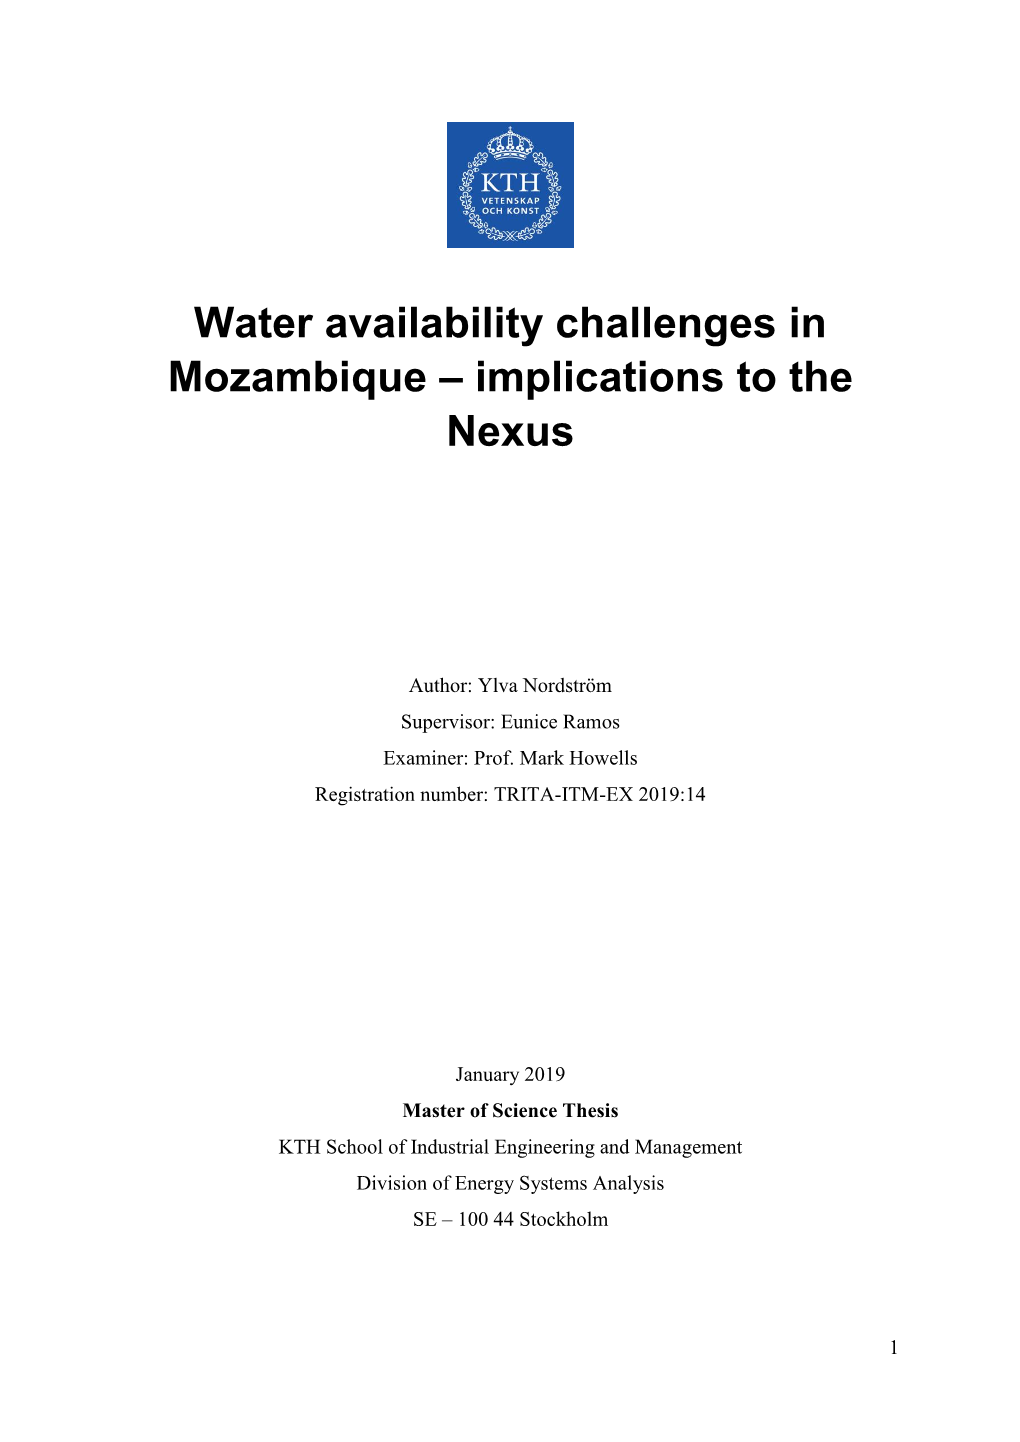 Water Availability Challenges in Mozambique – Implications to the Nexus